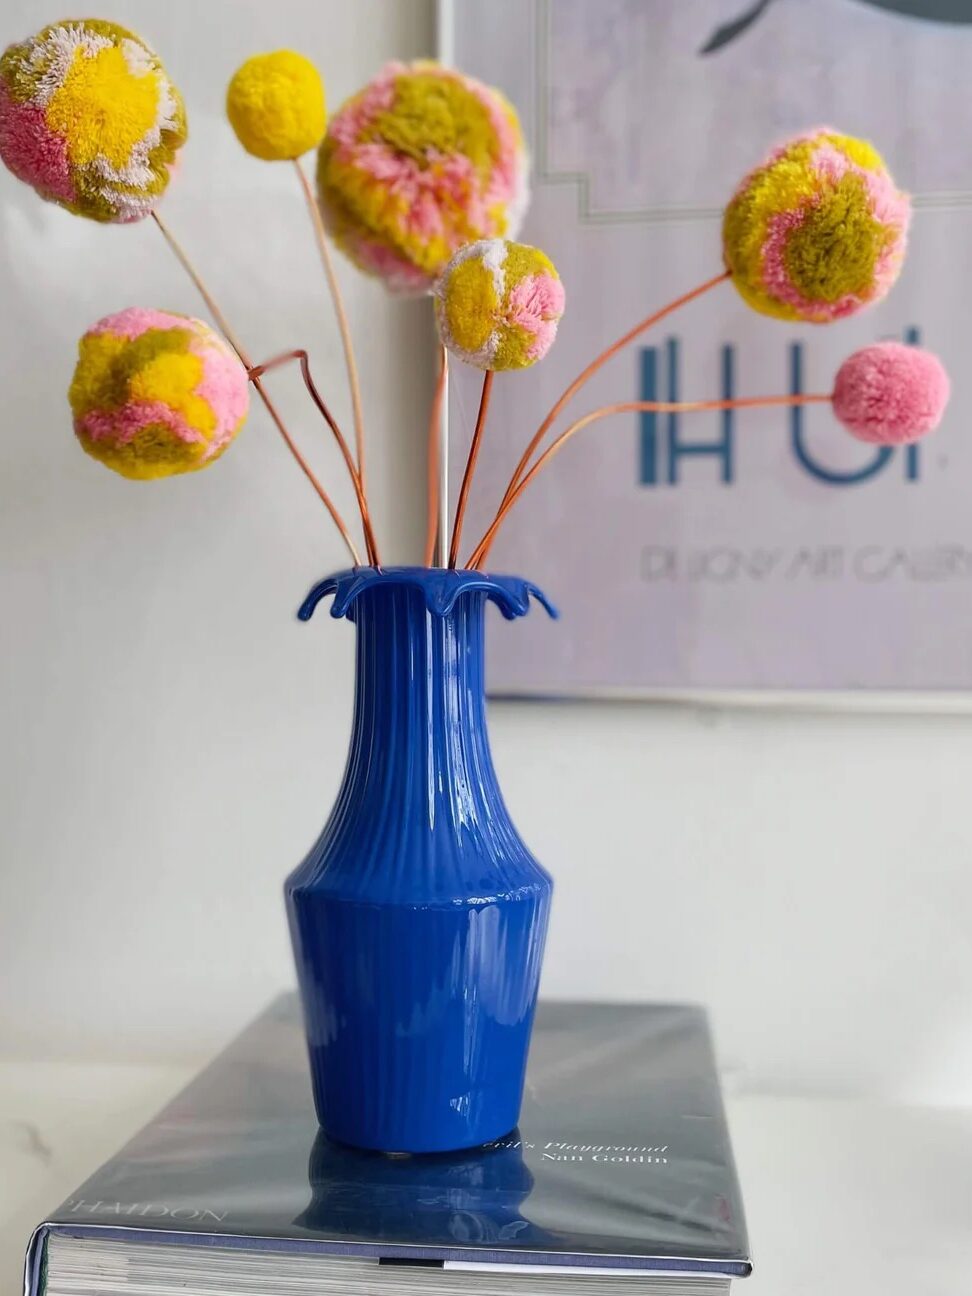 Seven yellow and pink pom stems sit in a blue vase on a table